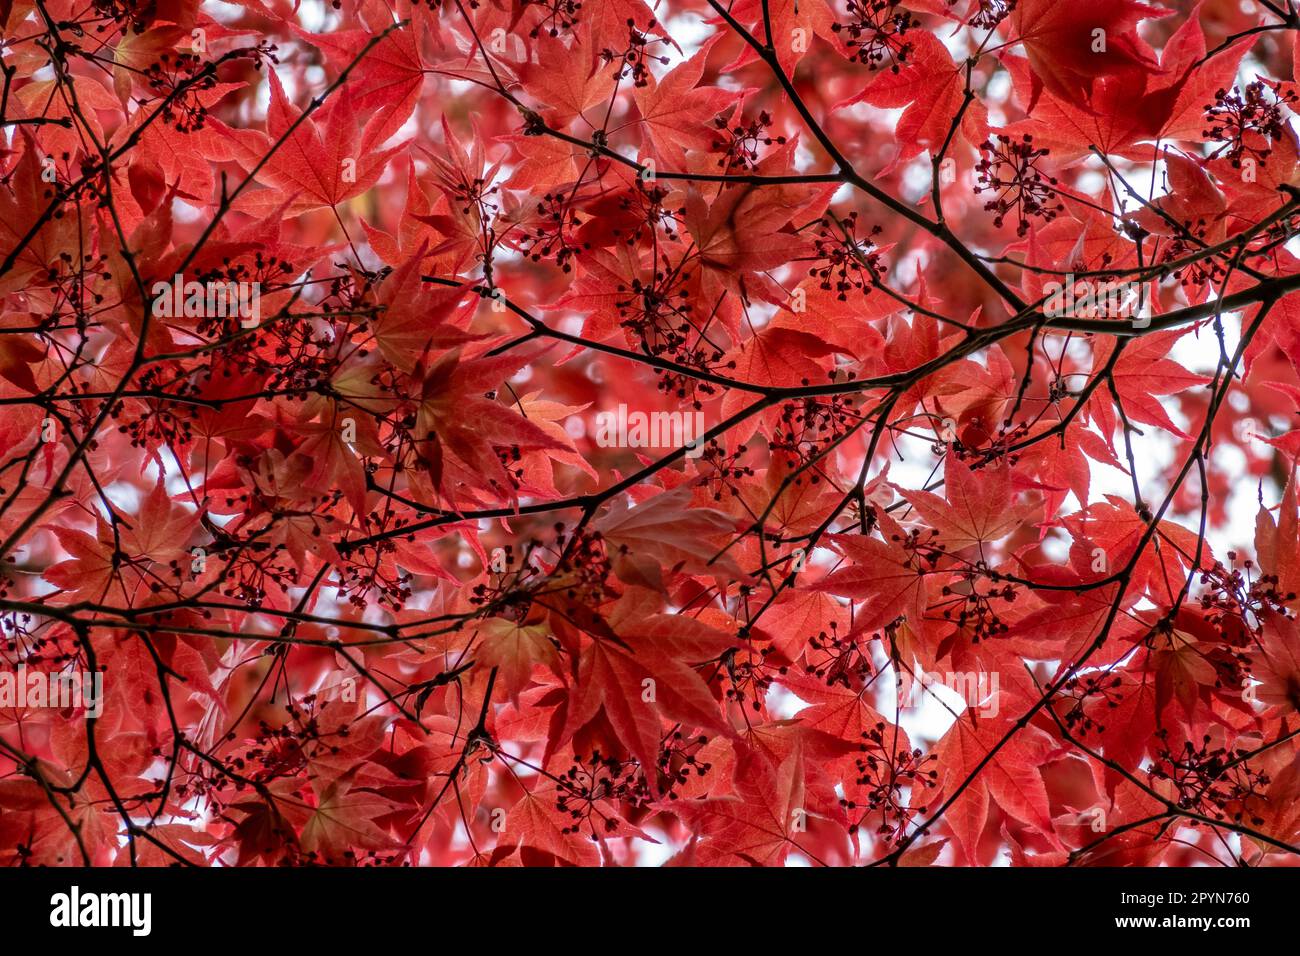 Japanese maple, Acer palmatum 'Atropurpureum' red, tree with red leaves, view of foliage and branches from below, Netherlands Stock Photo